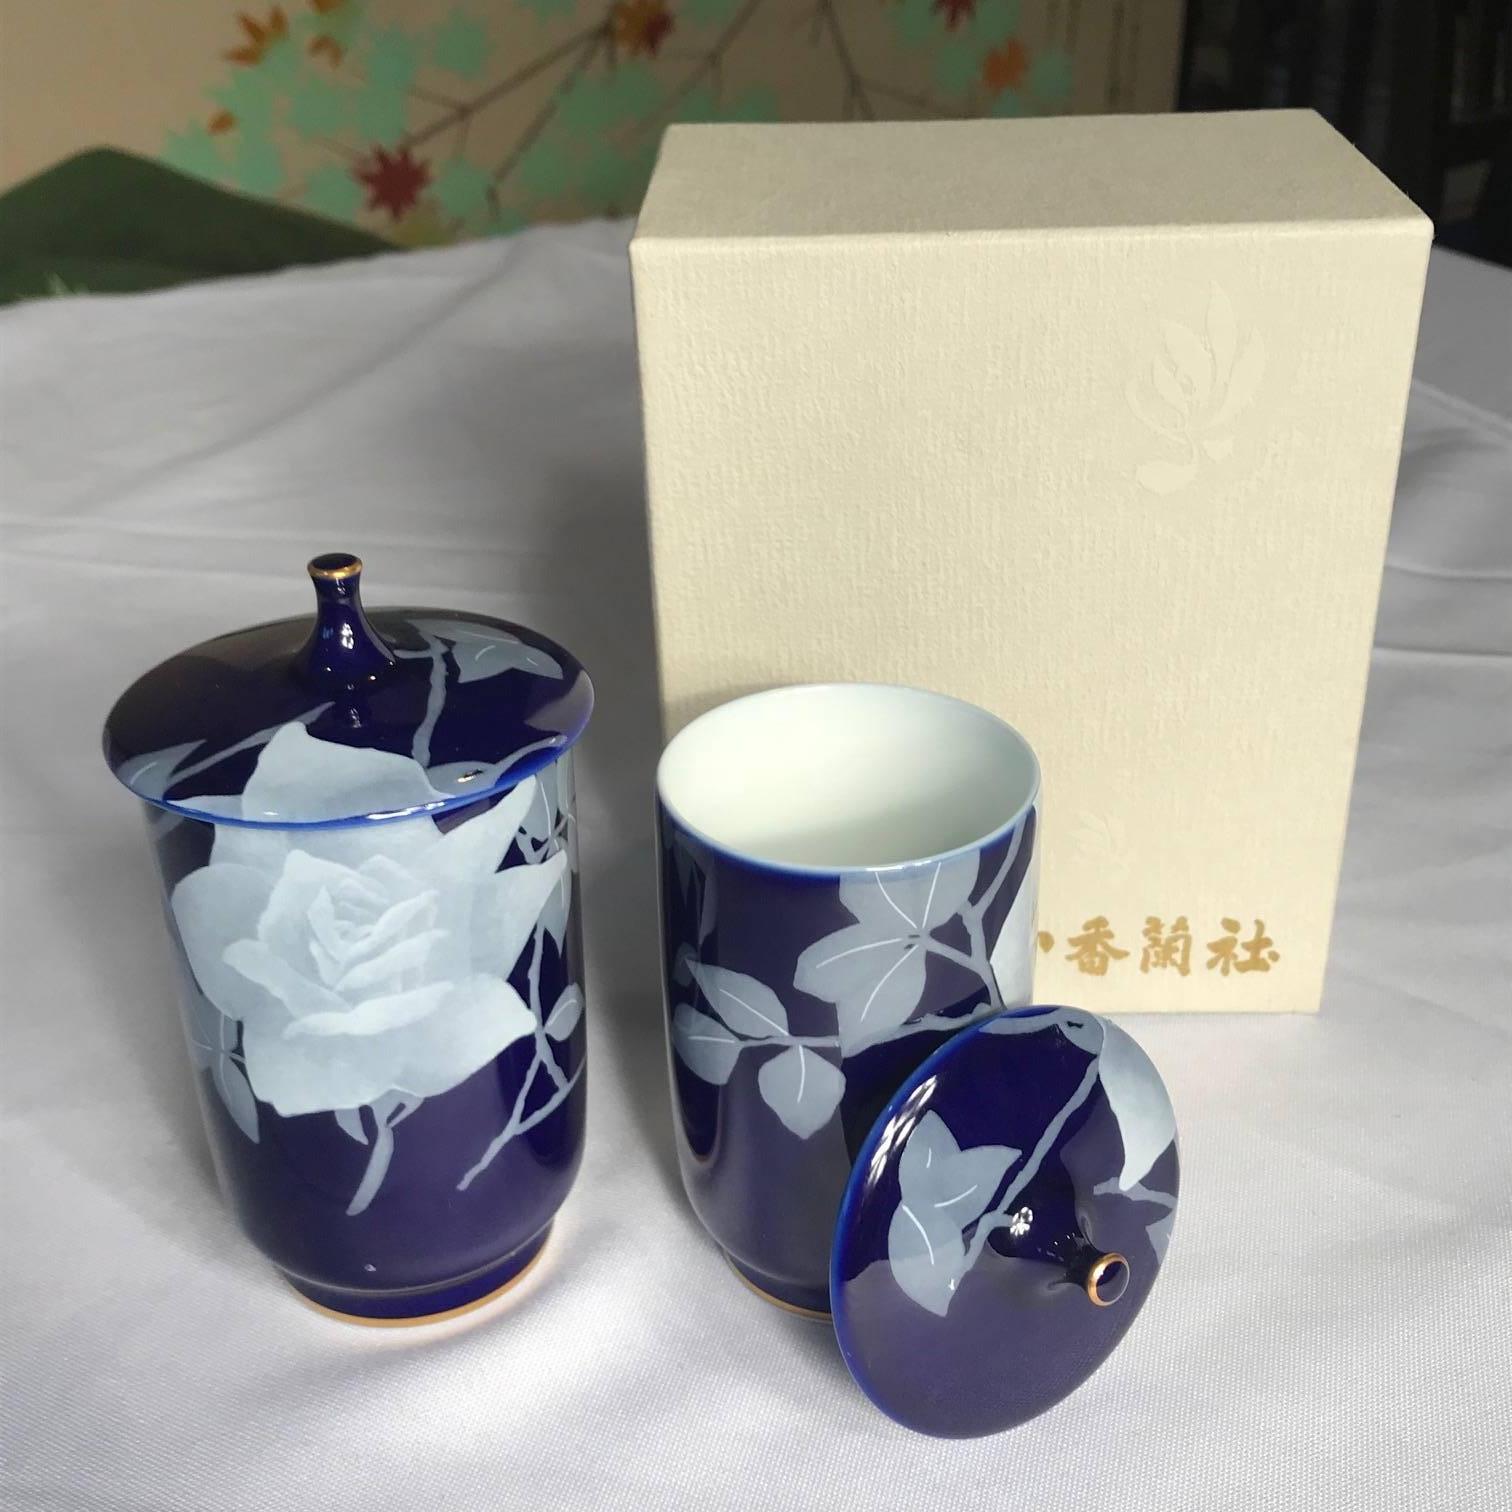 From Japan, a beautiful hand-painted and hand glazed lapis- cobalt blue pair of tea cups with brilliant white flowers and gold gilt high lights.

Perfect tea lover's delight. Mint condition.

Dimensions: Tallest tea cup is 4 inches tall and 2 inches